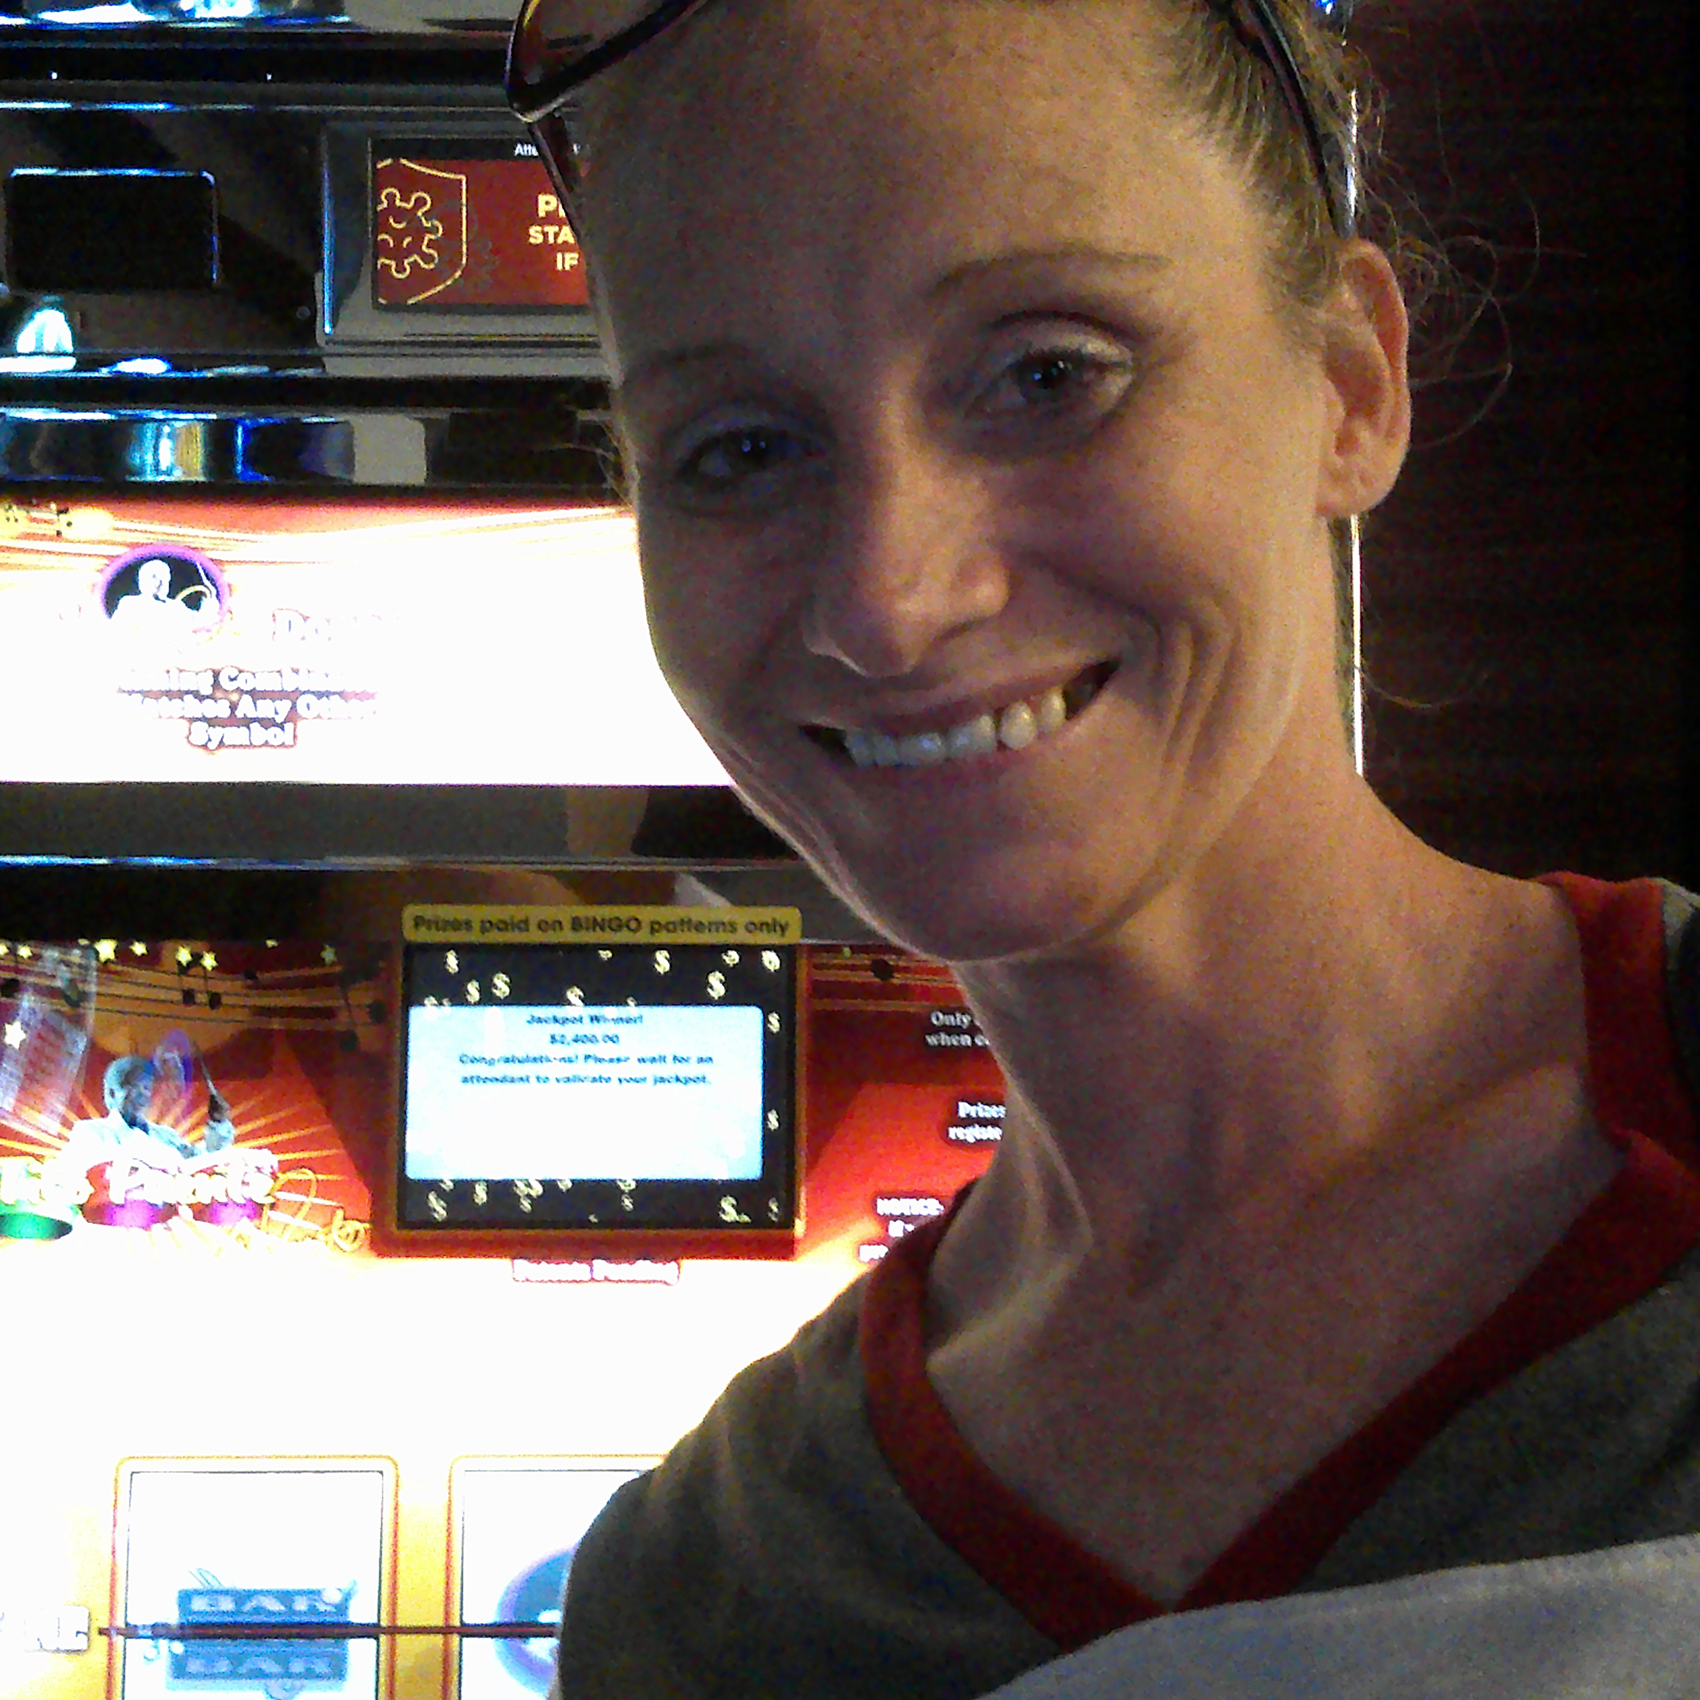 A woman smiling besides slot machine at 7th Street Casino